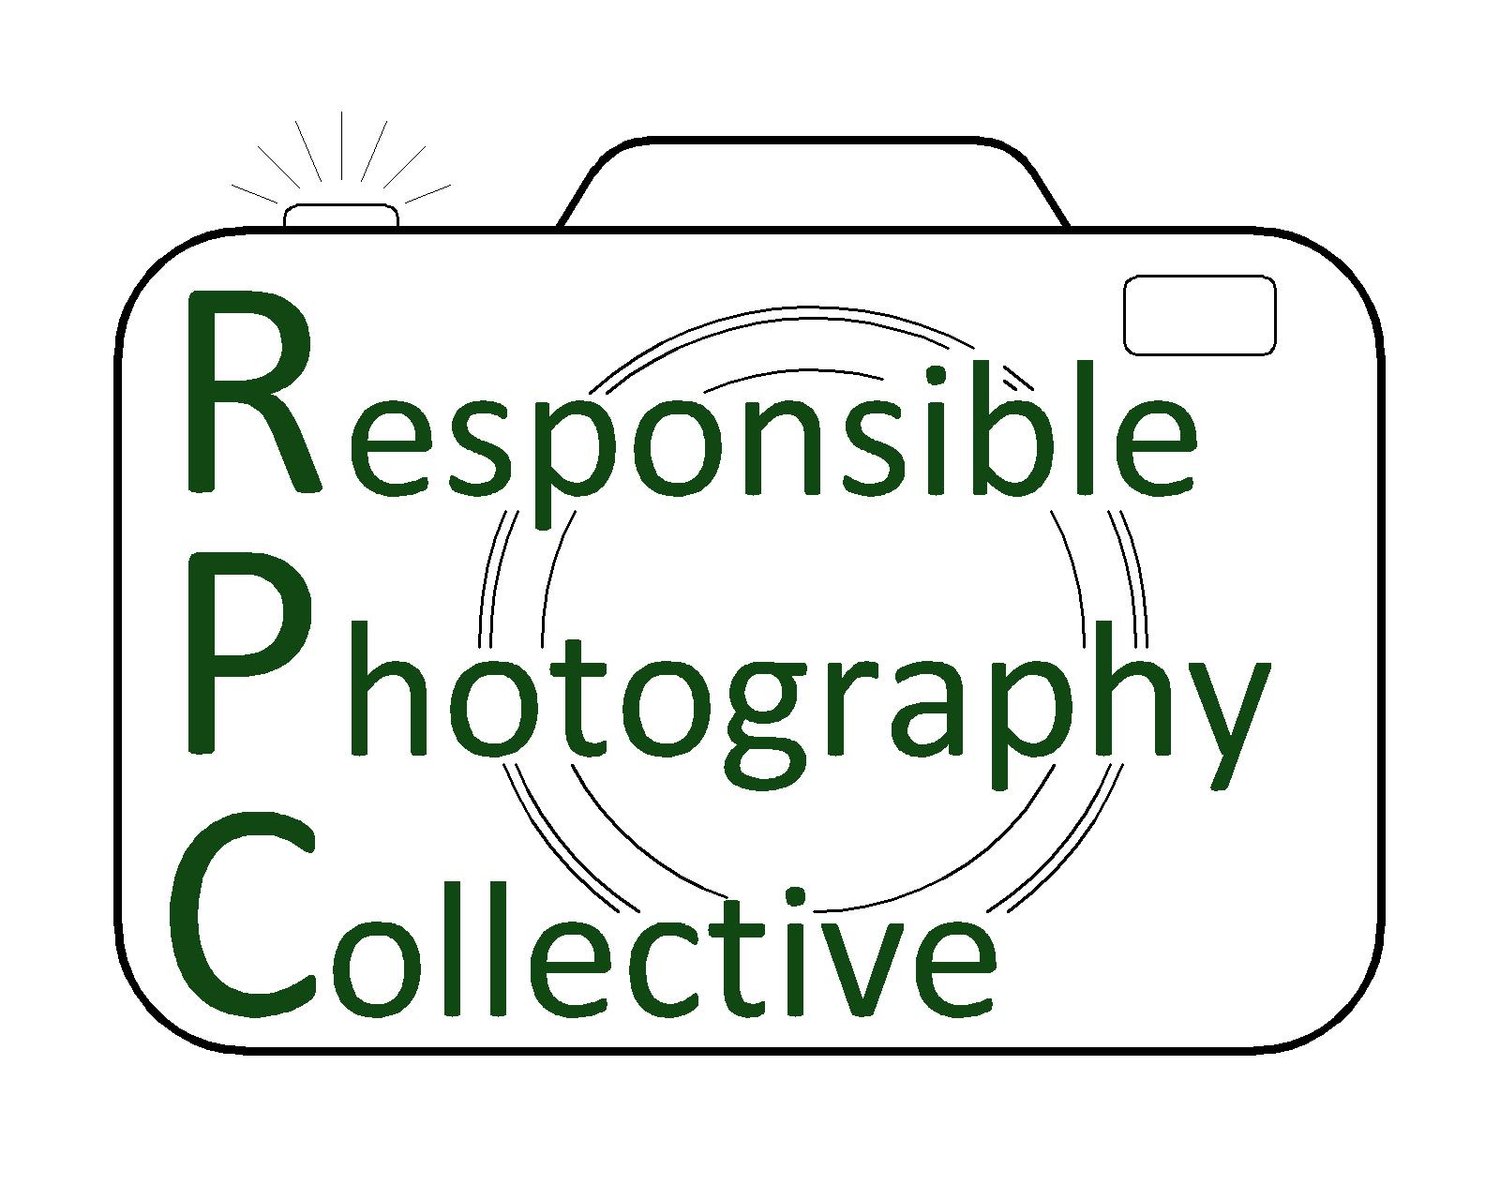 Responsible Photography Collective